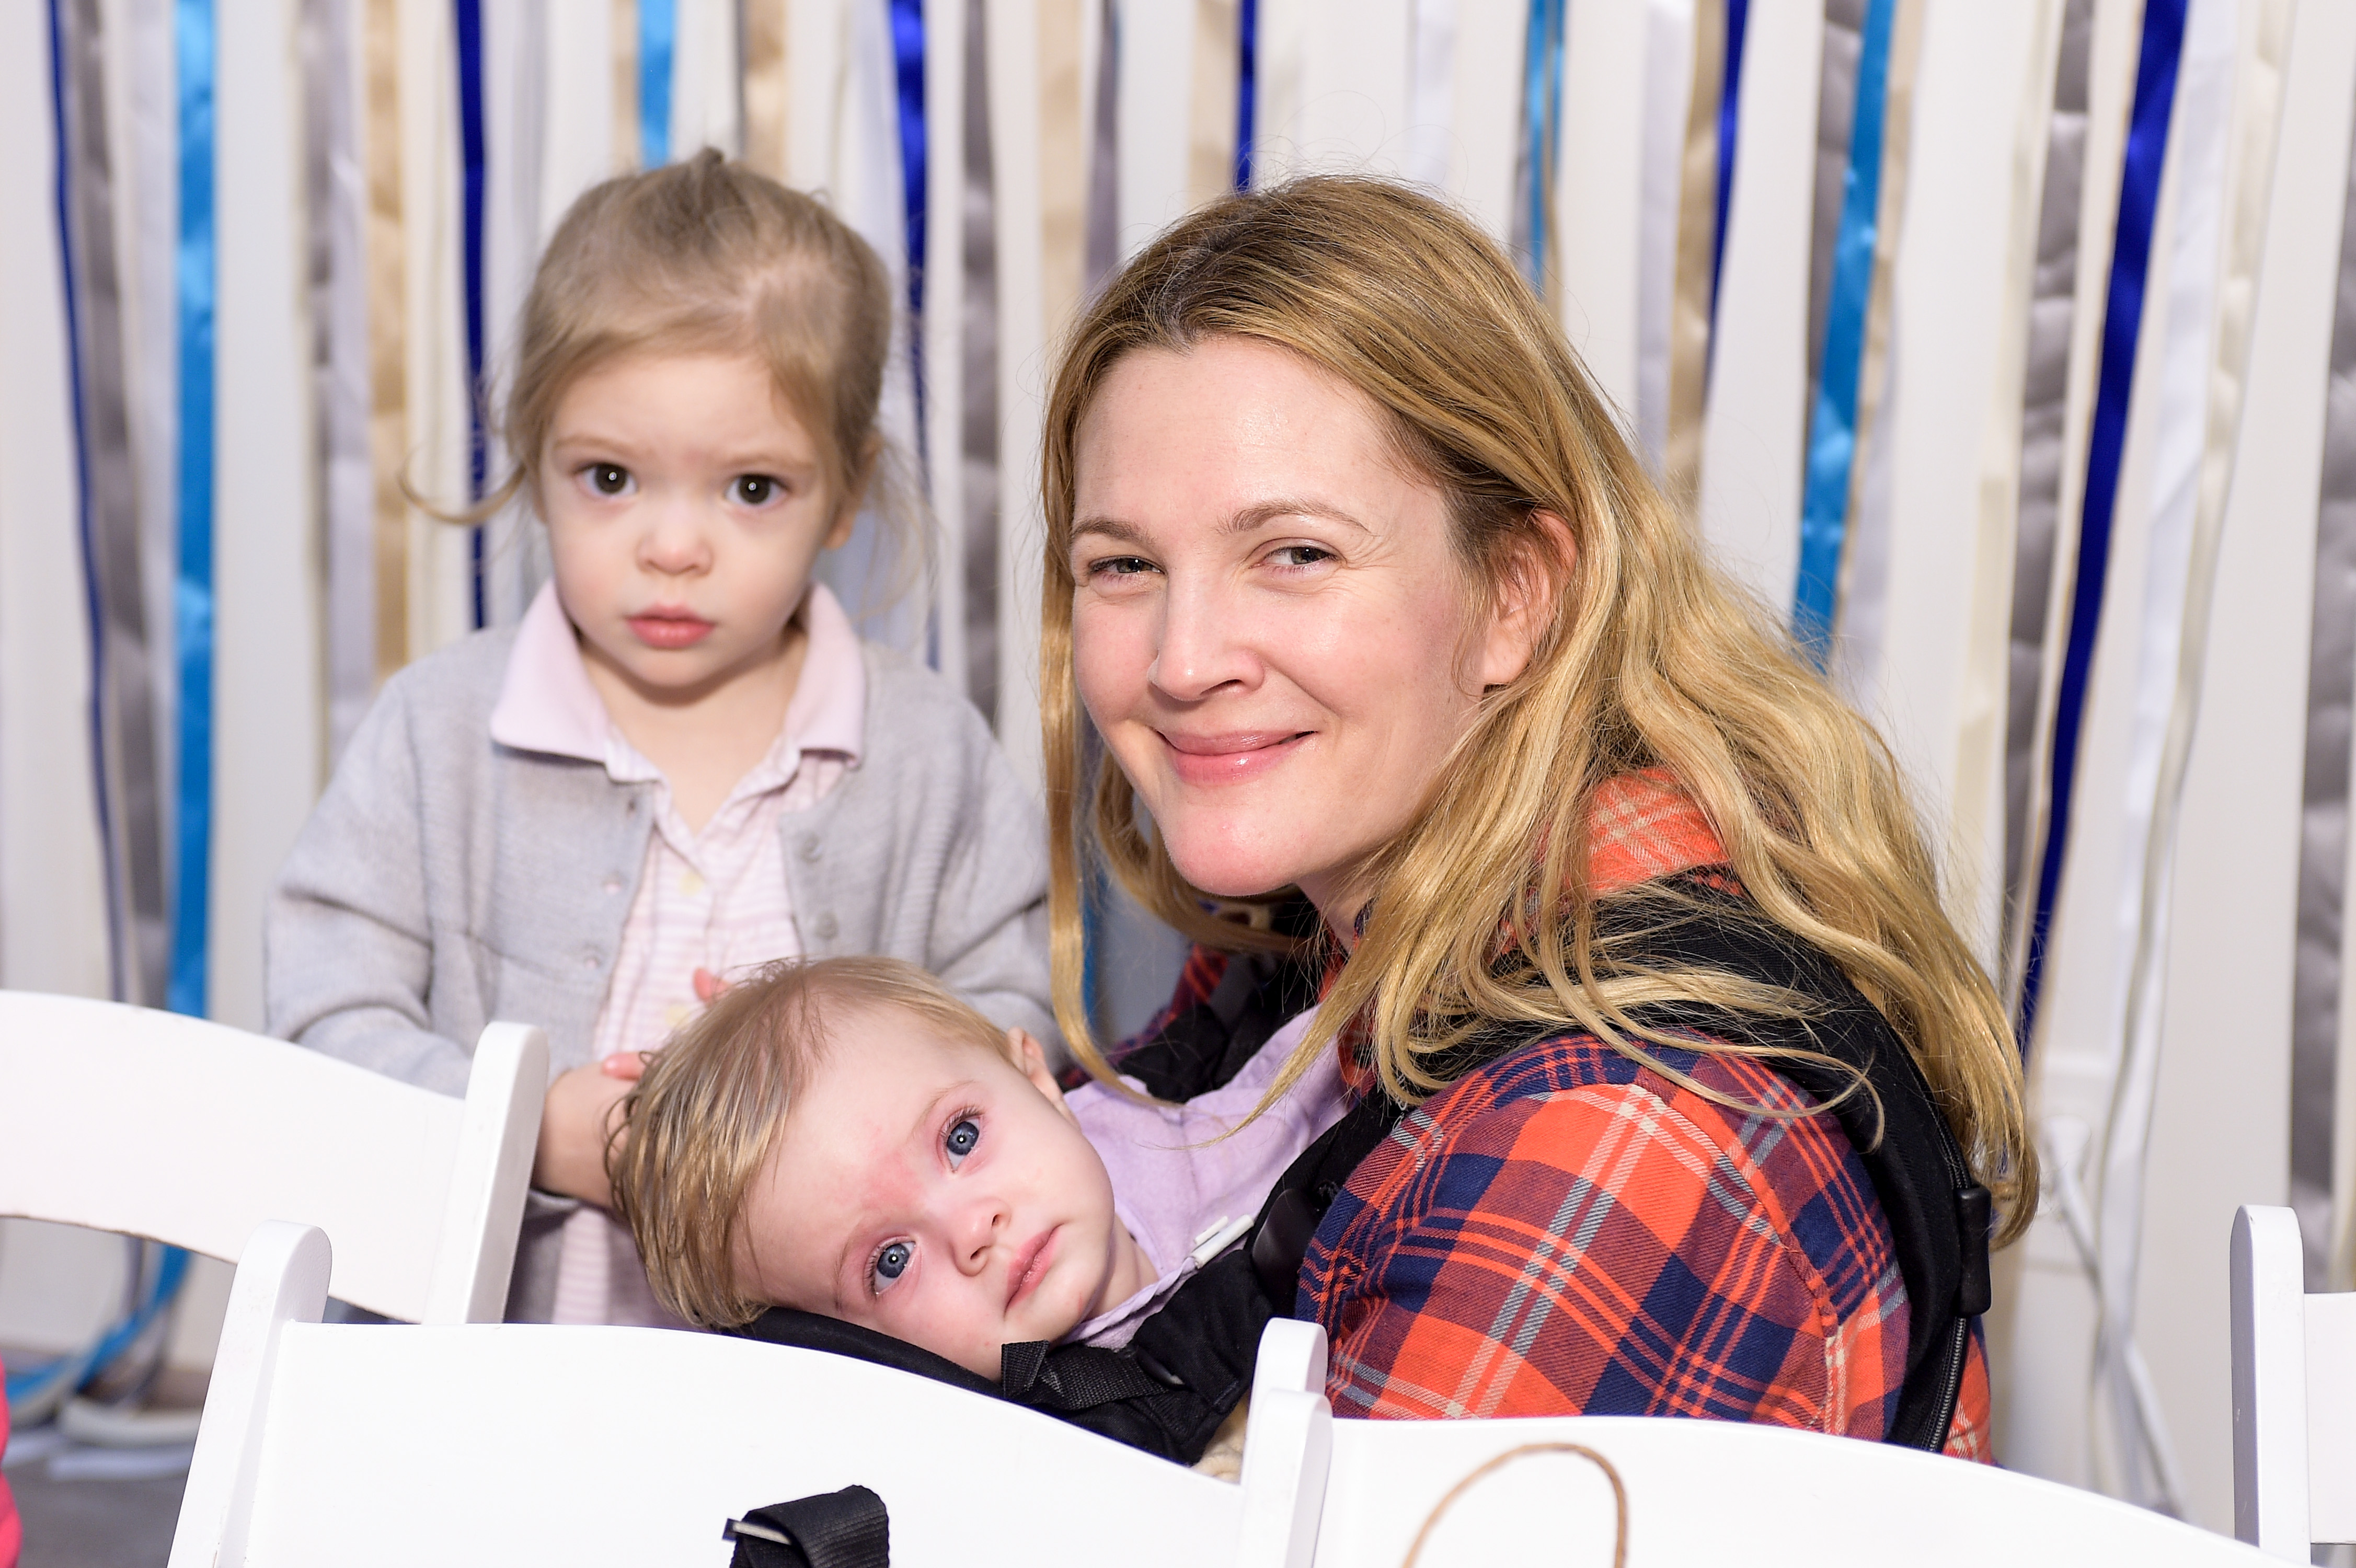 Drew Barrymore, Olive Barrymore Kopelman, and Frankie Barrymore Kopelman attend Baby2Baby Holiday Party Presented By The Honest Company in Los Angeles, California, on December 13, 2014. | Source: Getty Images